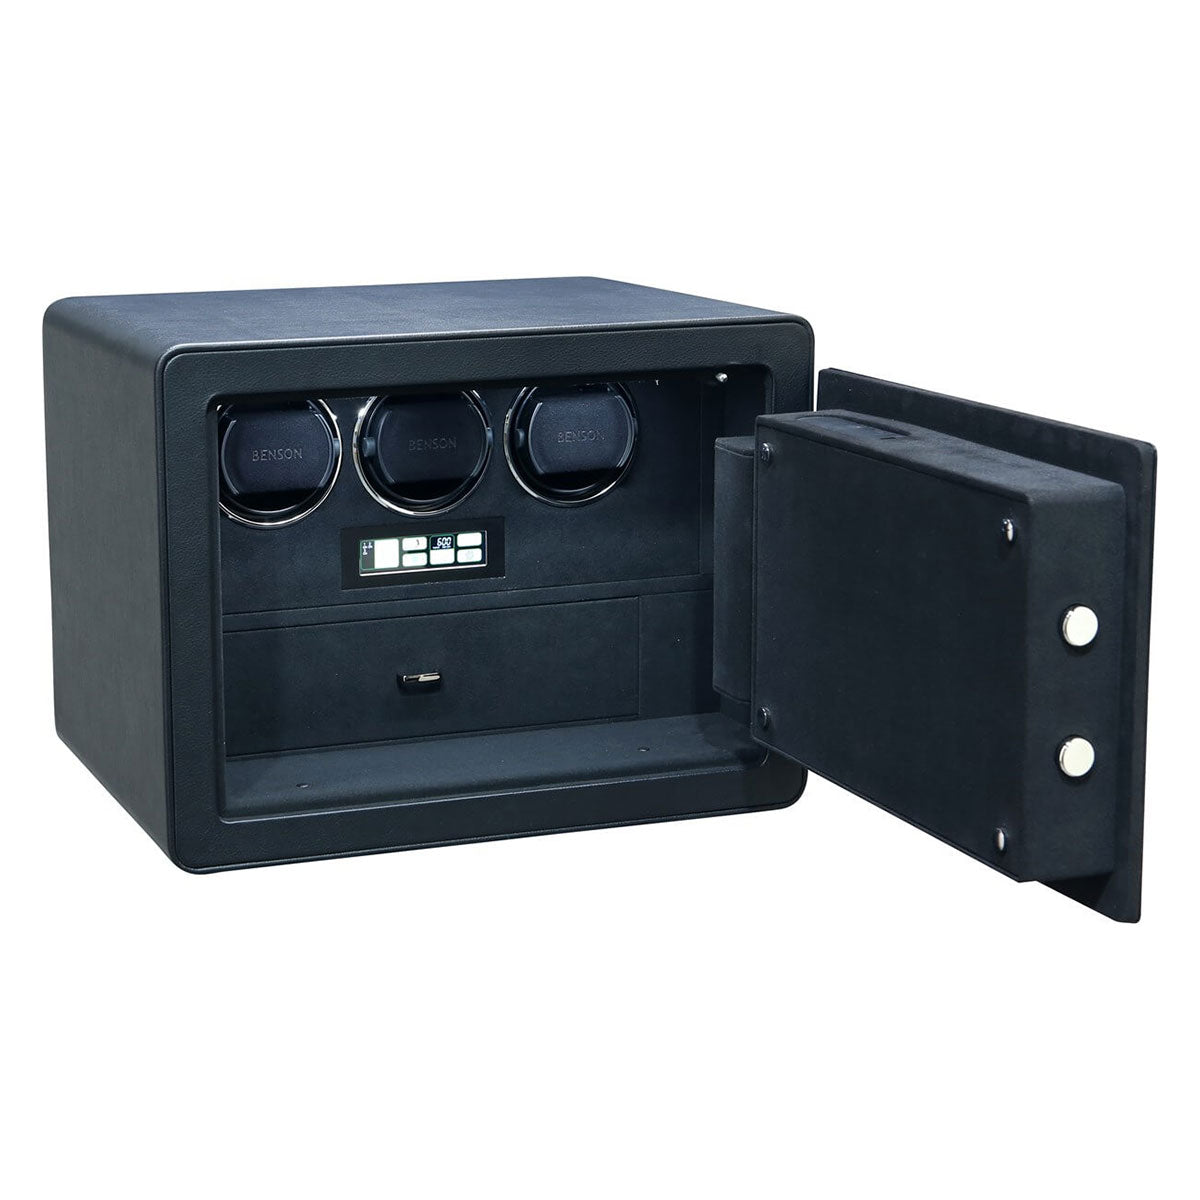 Benson Black Series Safe 3.22.B - Watch safe for 3 watches